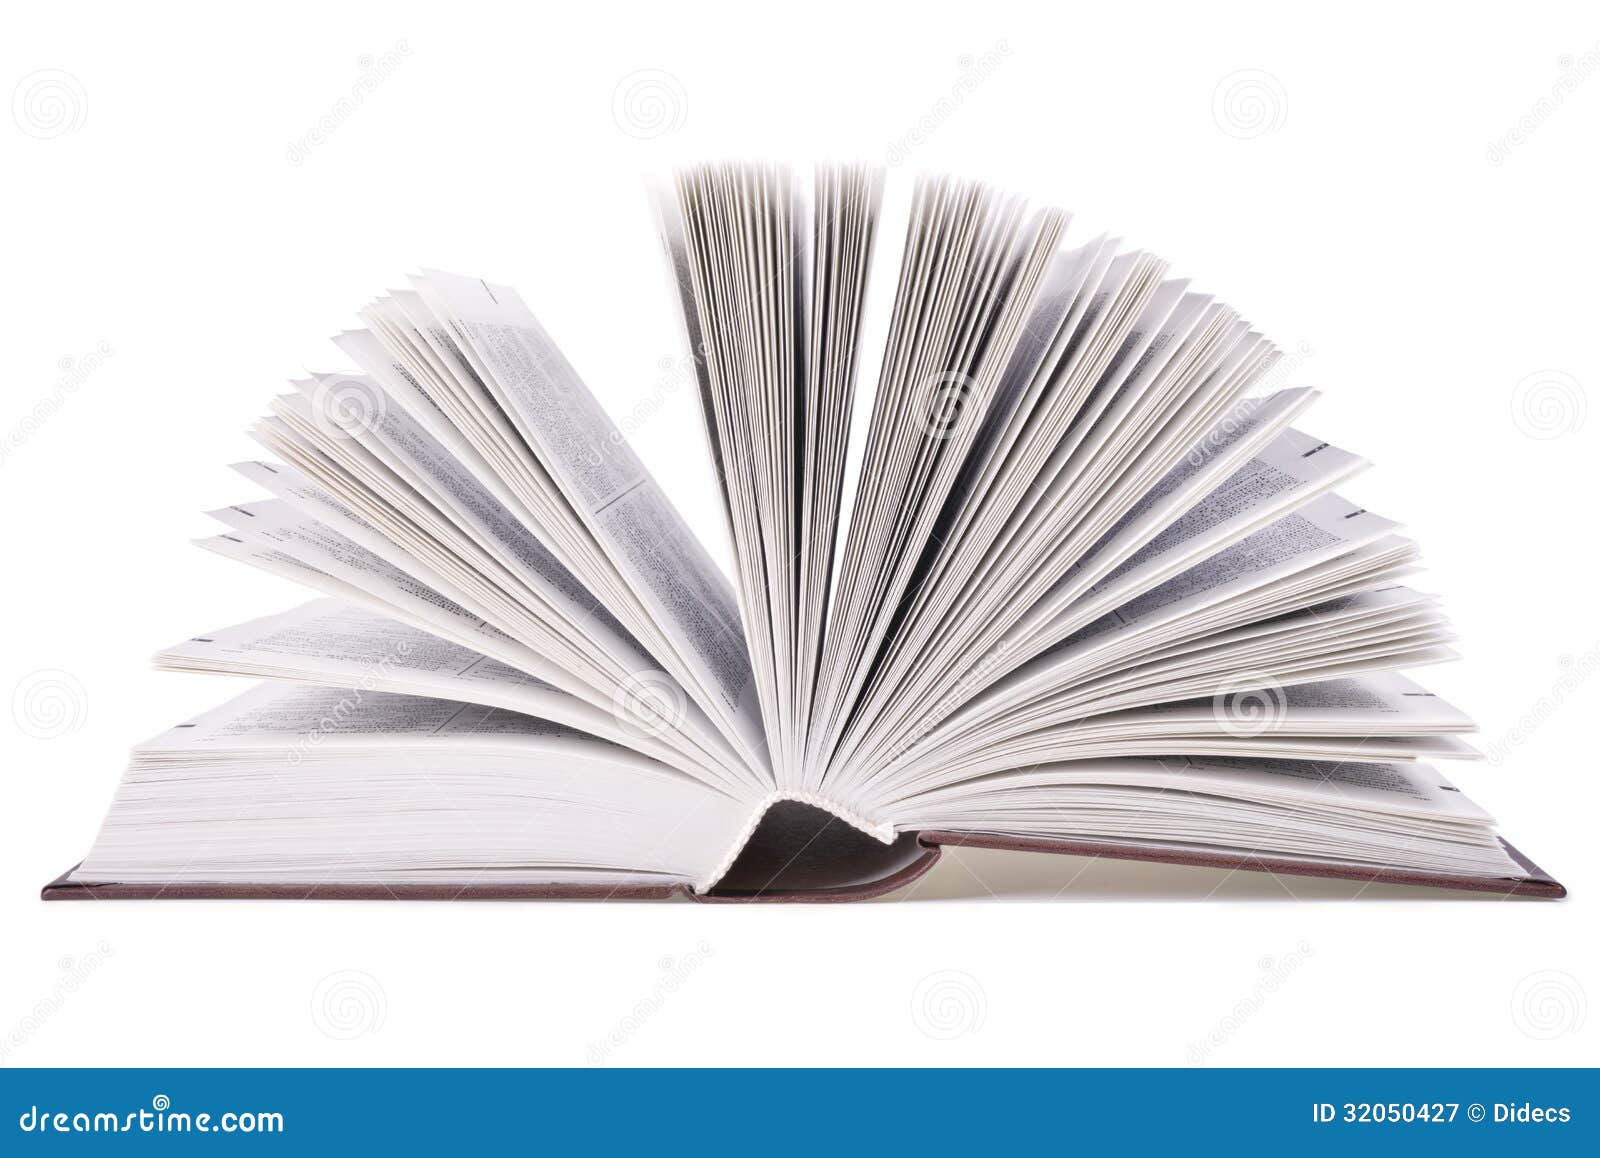 763,890 Open Book Images, Stock Photos, 3D objects, & Vectors